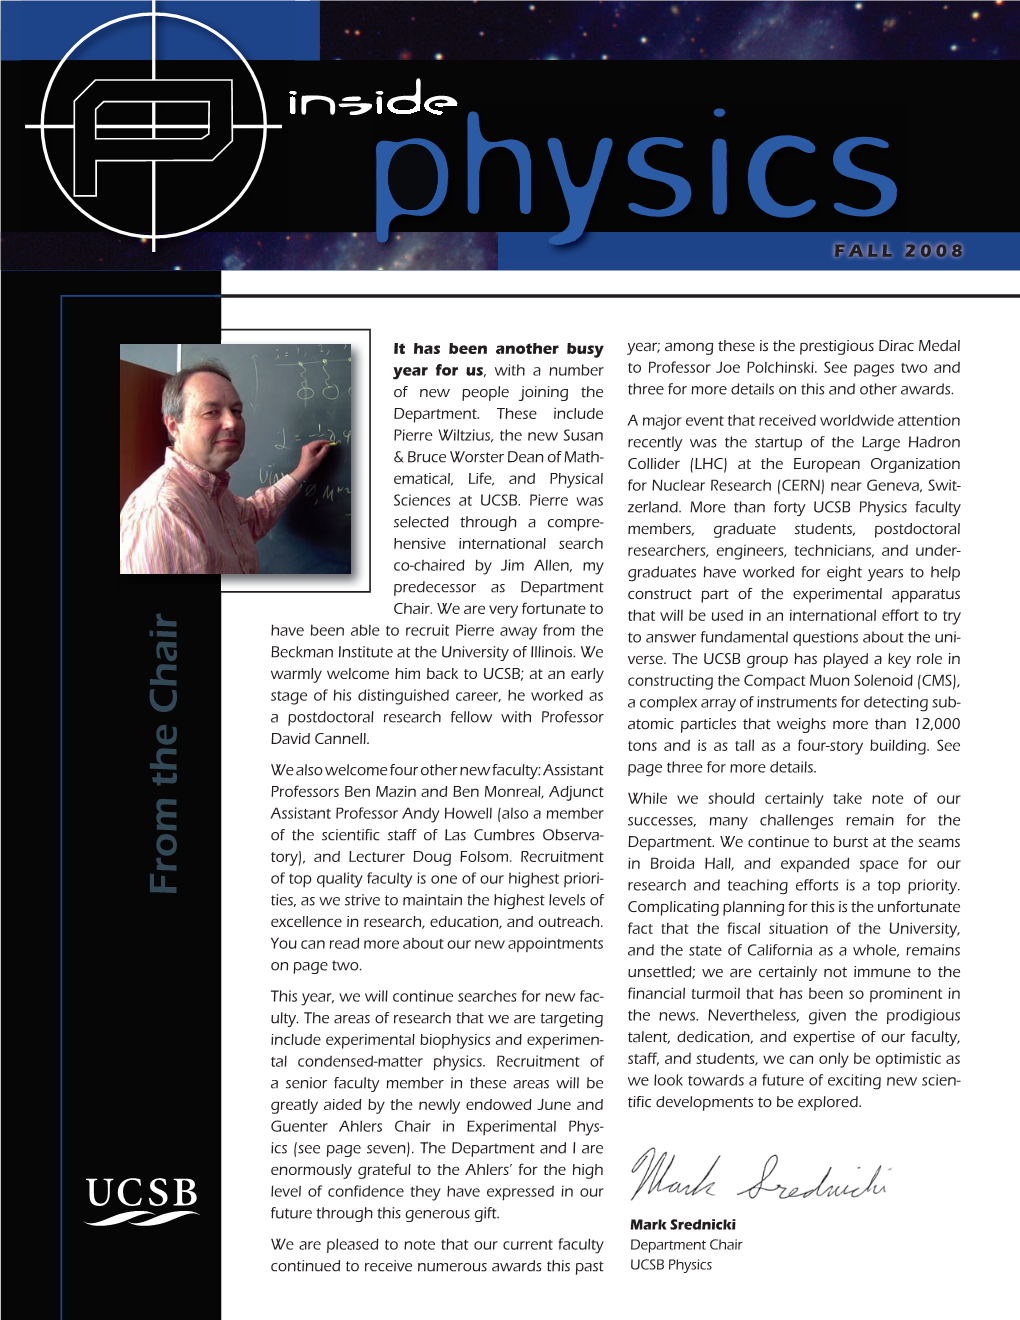 Reading in Fall 2008'S Inside Physics